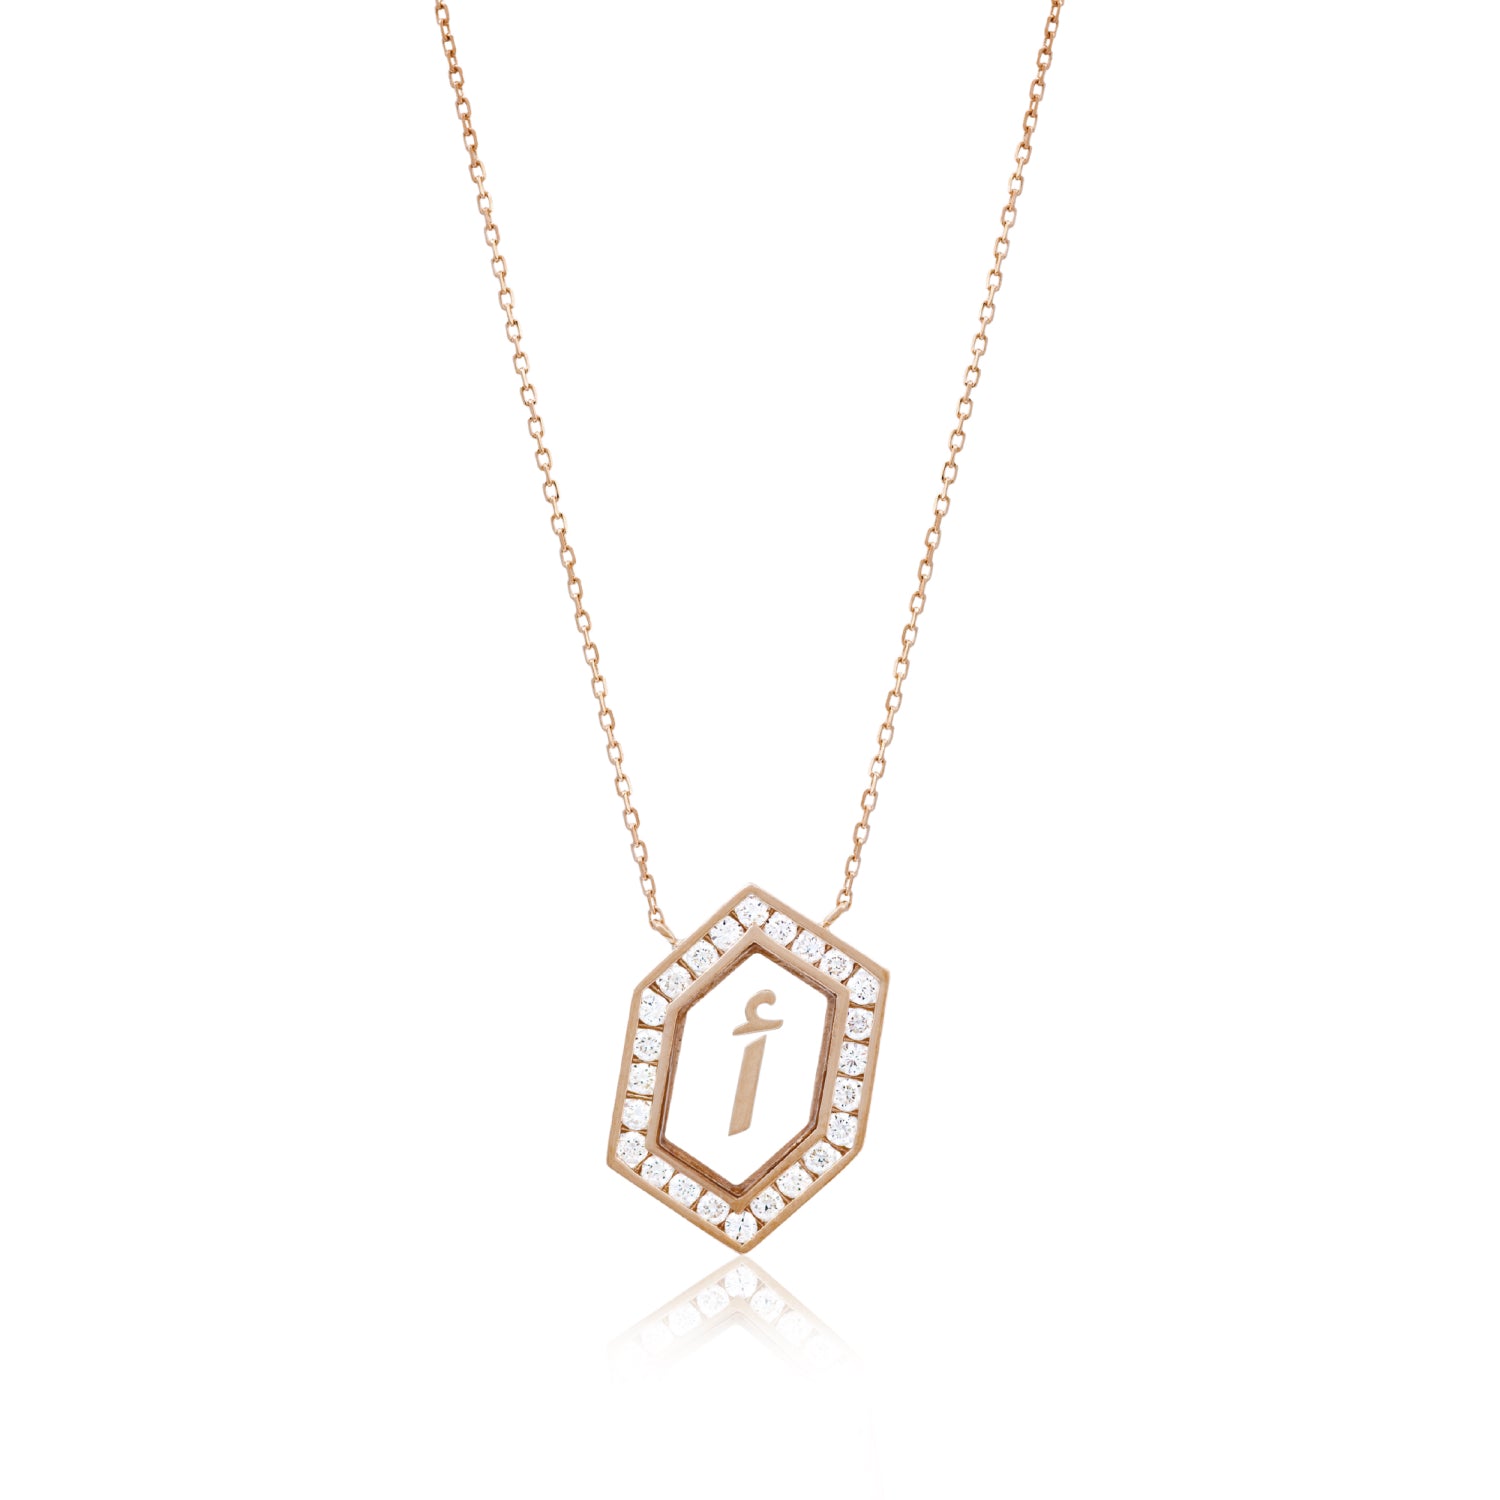 Qamoos 1.0 Letter أ Diamond Necklace in Rose Gold